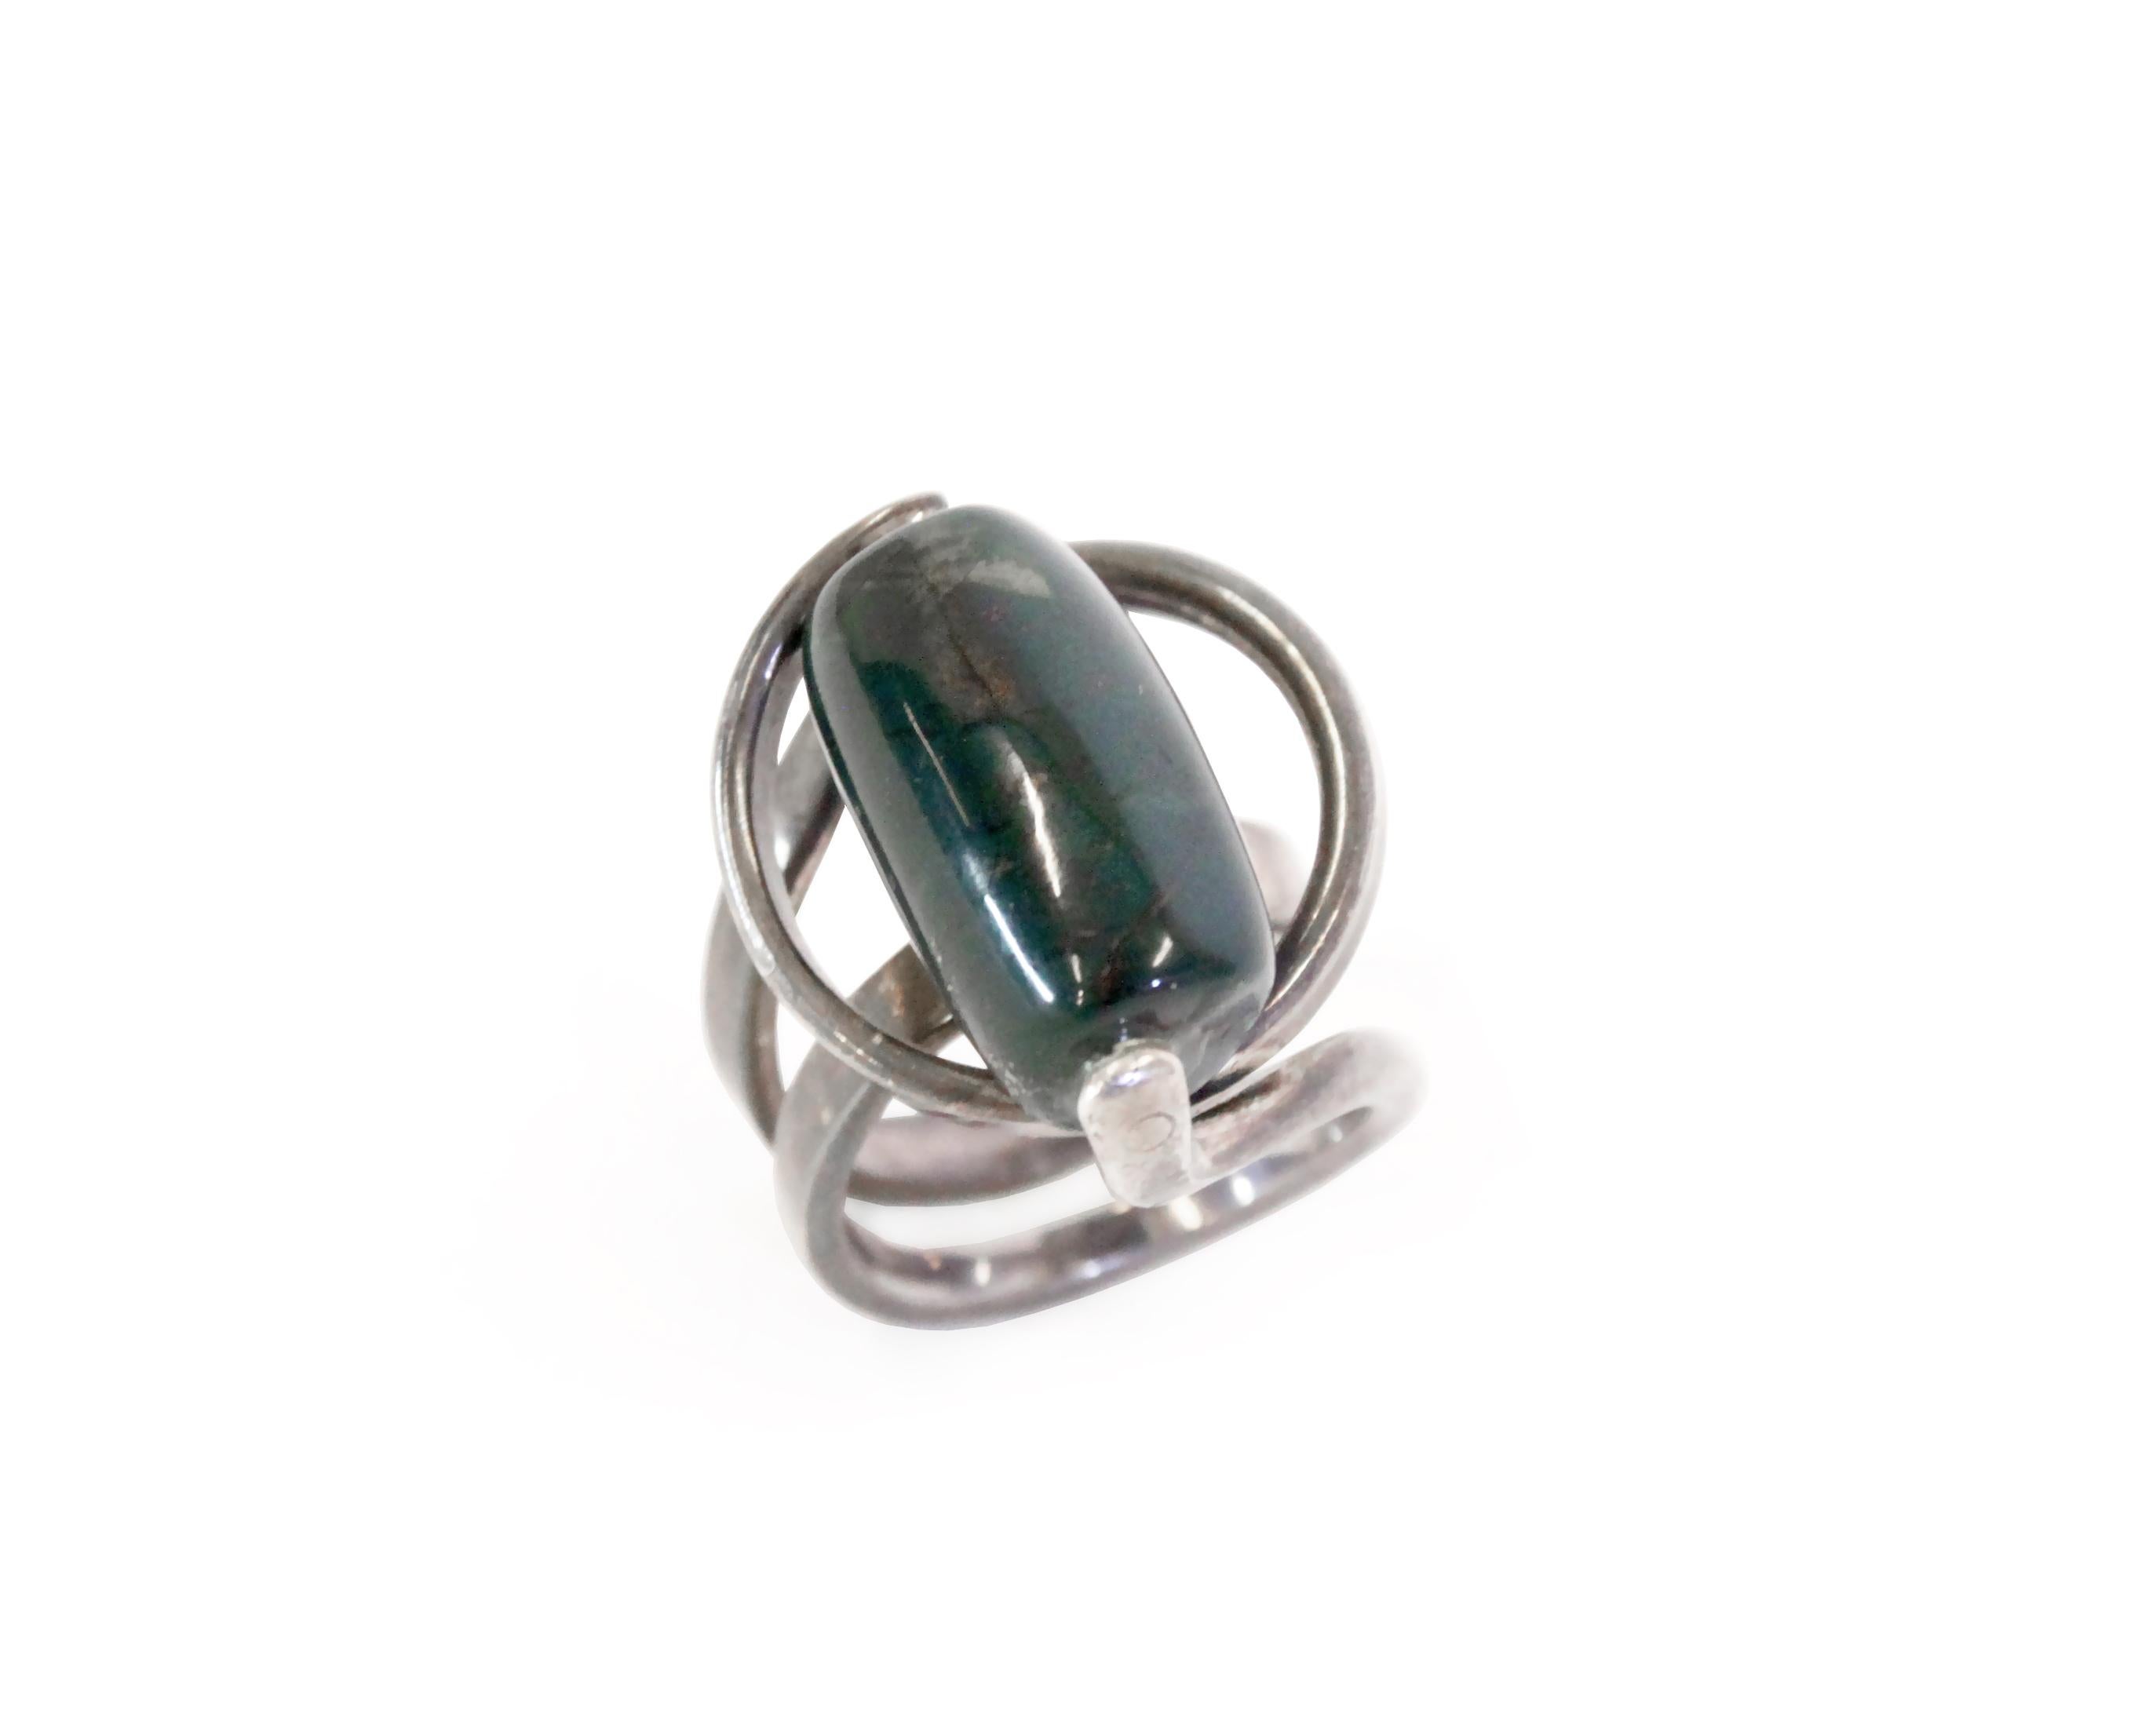 Sculptural and decorative ring in silver with a malachite stone. Designed by Erling Christoffersen and made in Norway by PLUS from ca 1960s second half. The ring is in very good condition with all elements in full working order.

Ring size 57. 